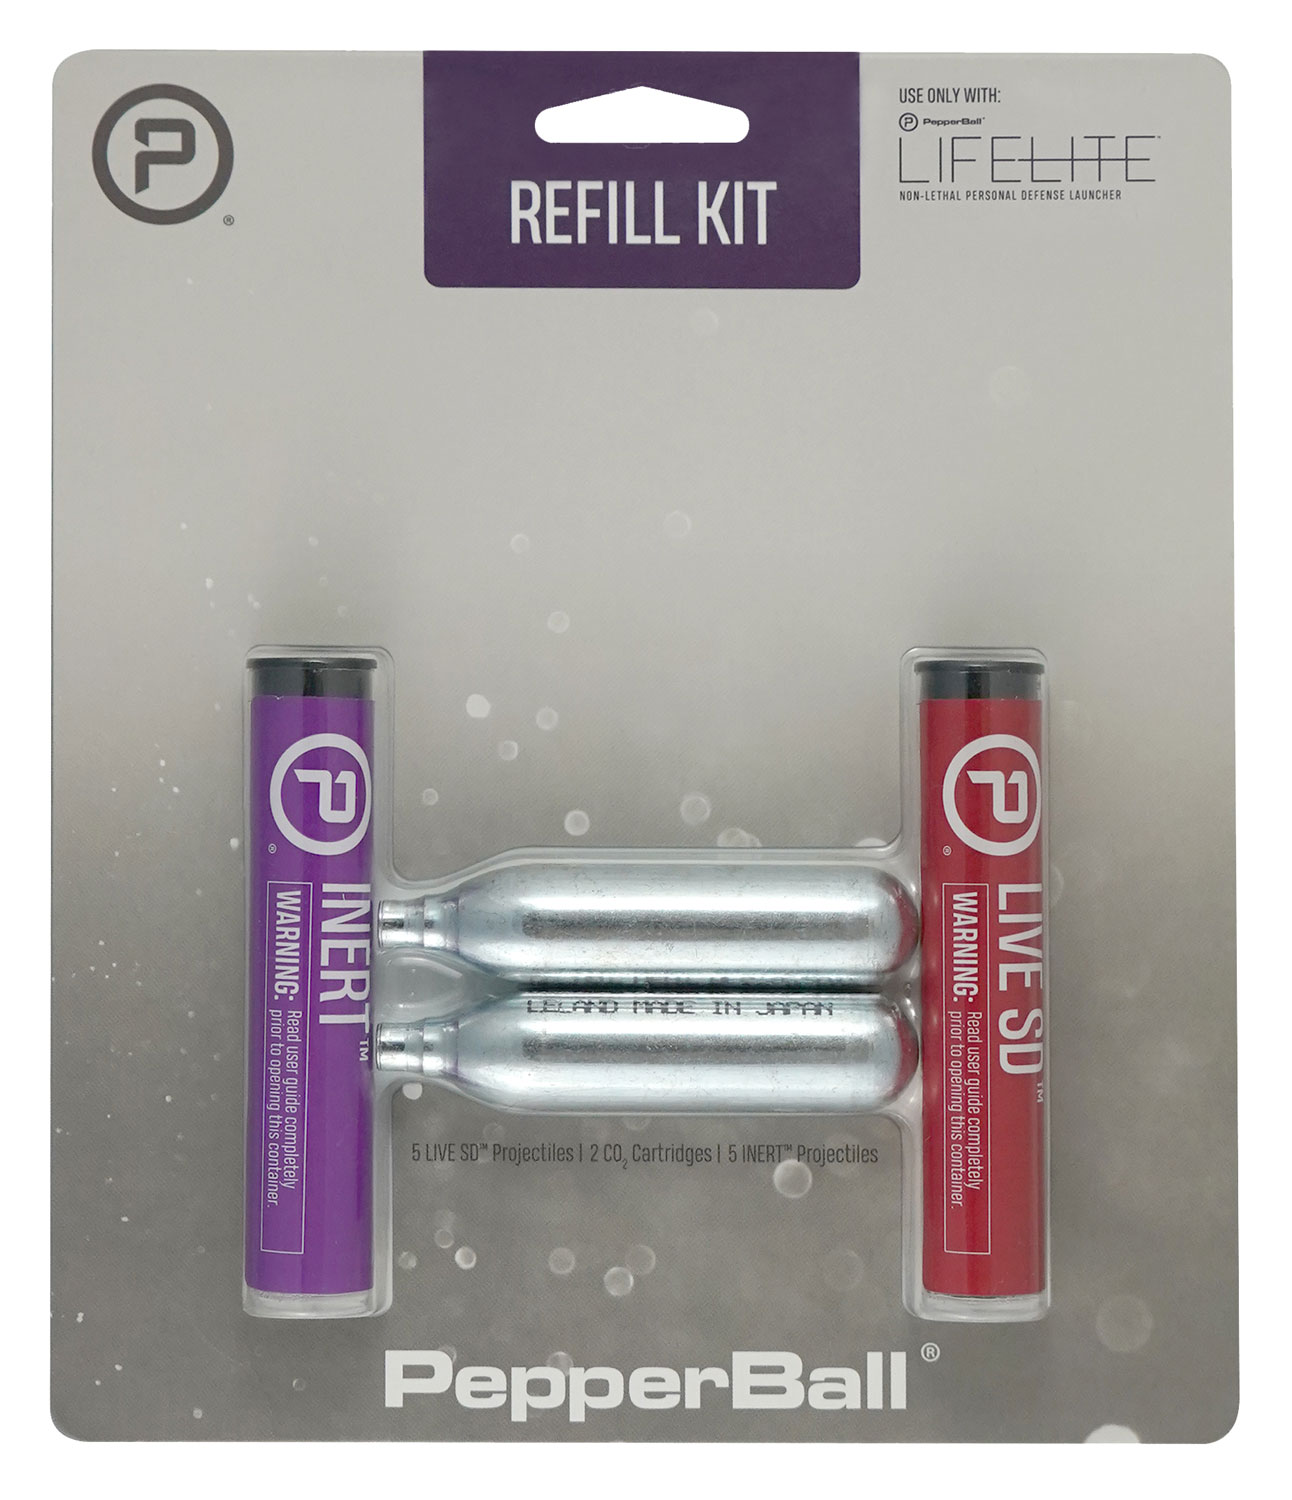 UTS/PEPPERBALL 970010178 LifeLite Refill Kit Includes Practice Projectile/SD PepperBall Projectile/2 CO2 Cartridges